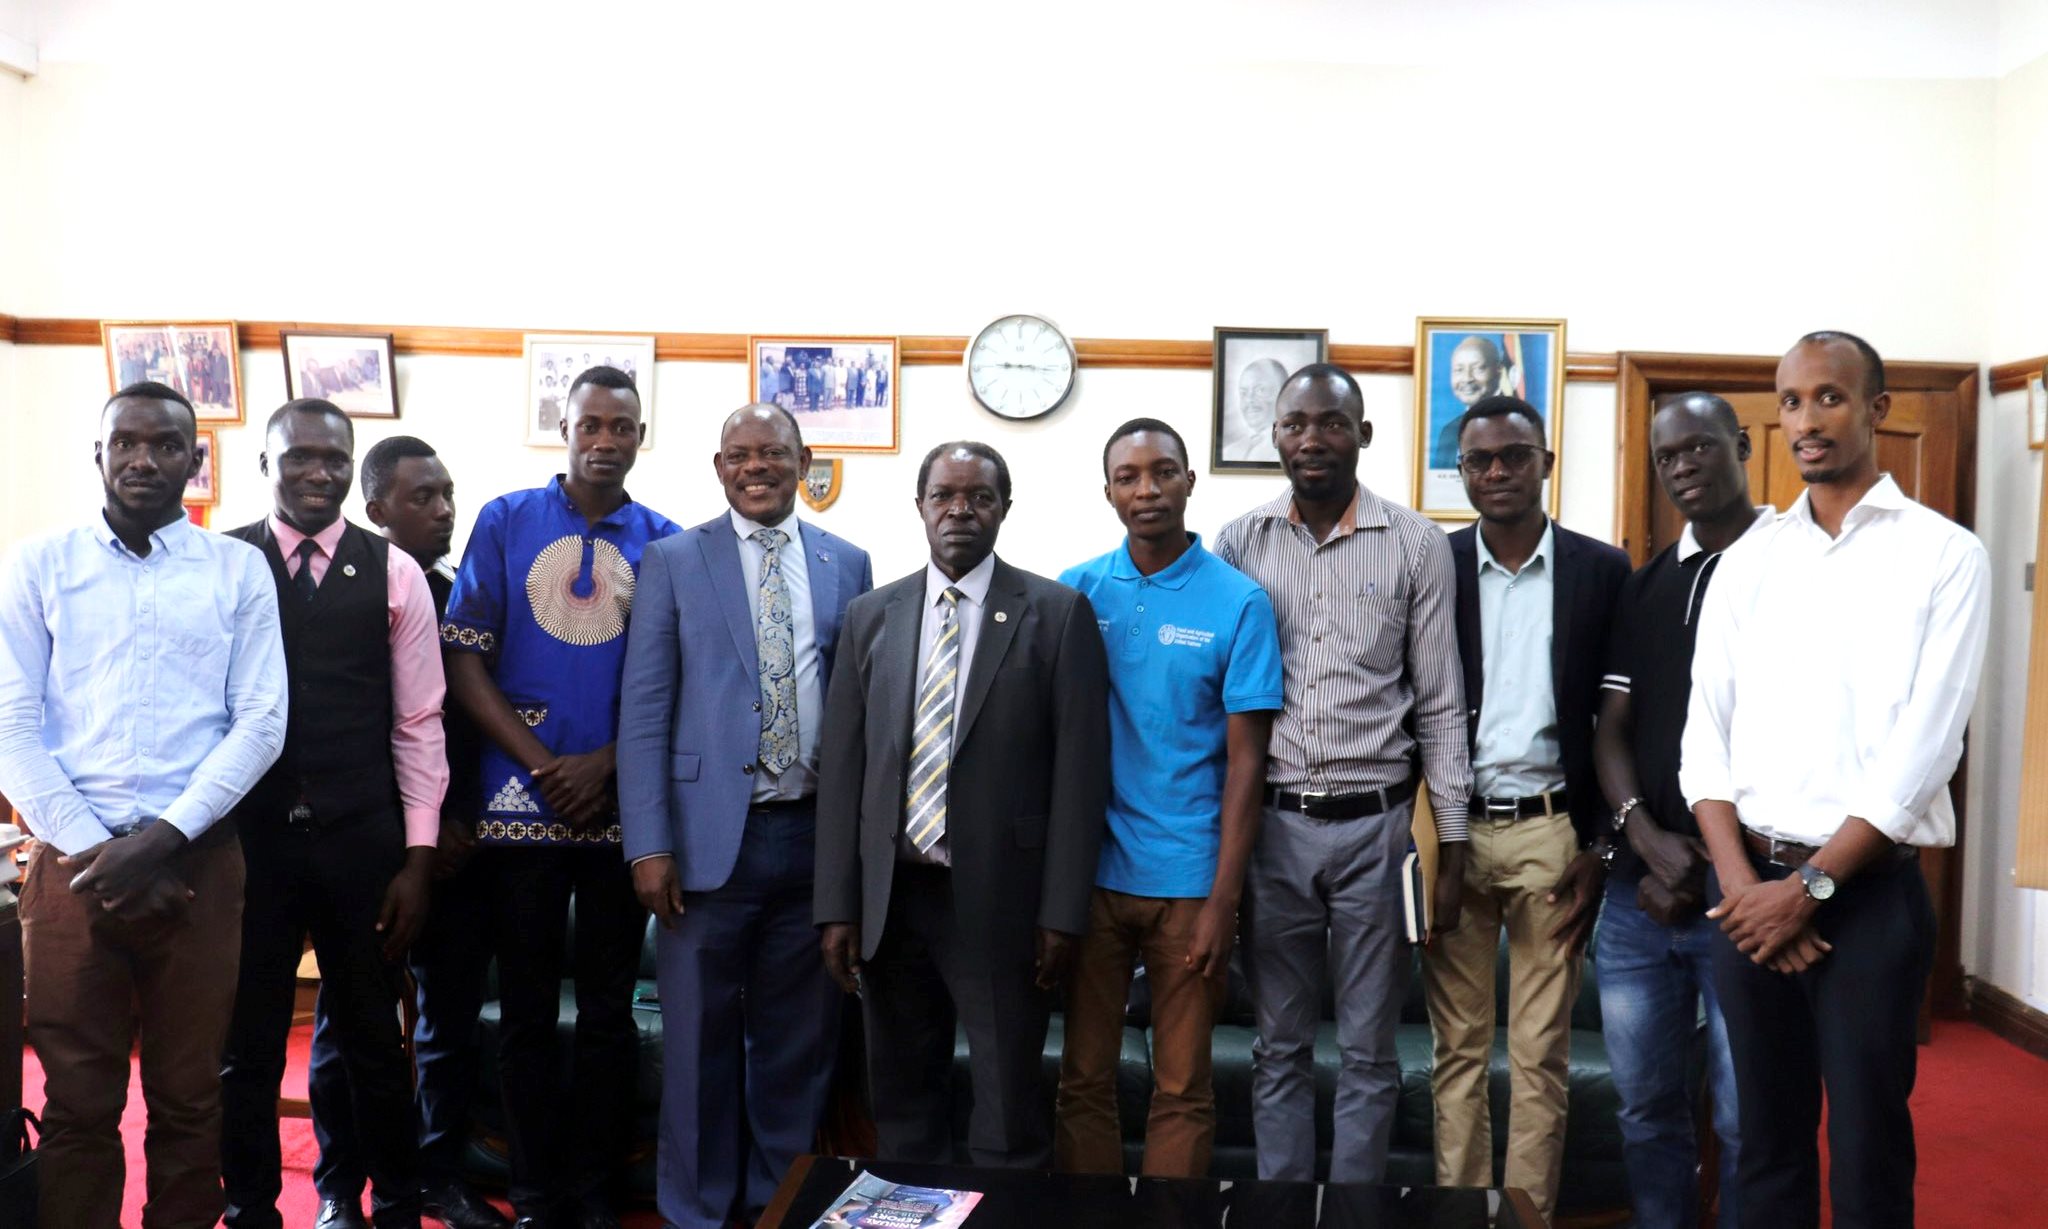 The Vice Chancellor-Prof. Barnabas Nawangwe (5th Left) and Ag. DVCFA-Prof. William Bazeyo (Centre) with students who plan to promote Agricultural Education in Secondary Schools through competitions after the meeting on 11th February 2020, Makerere University, Kampala Uganda.